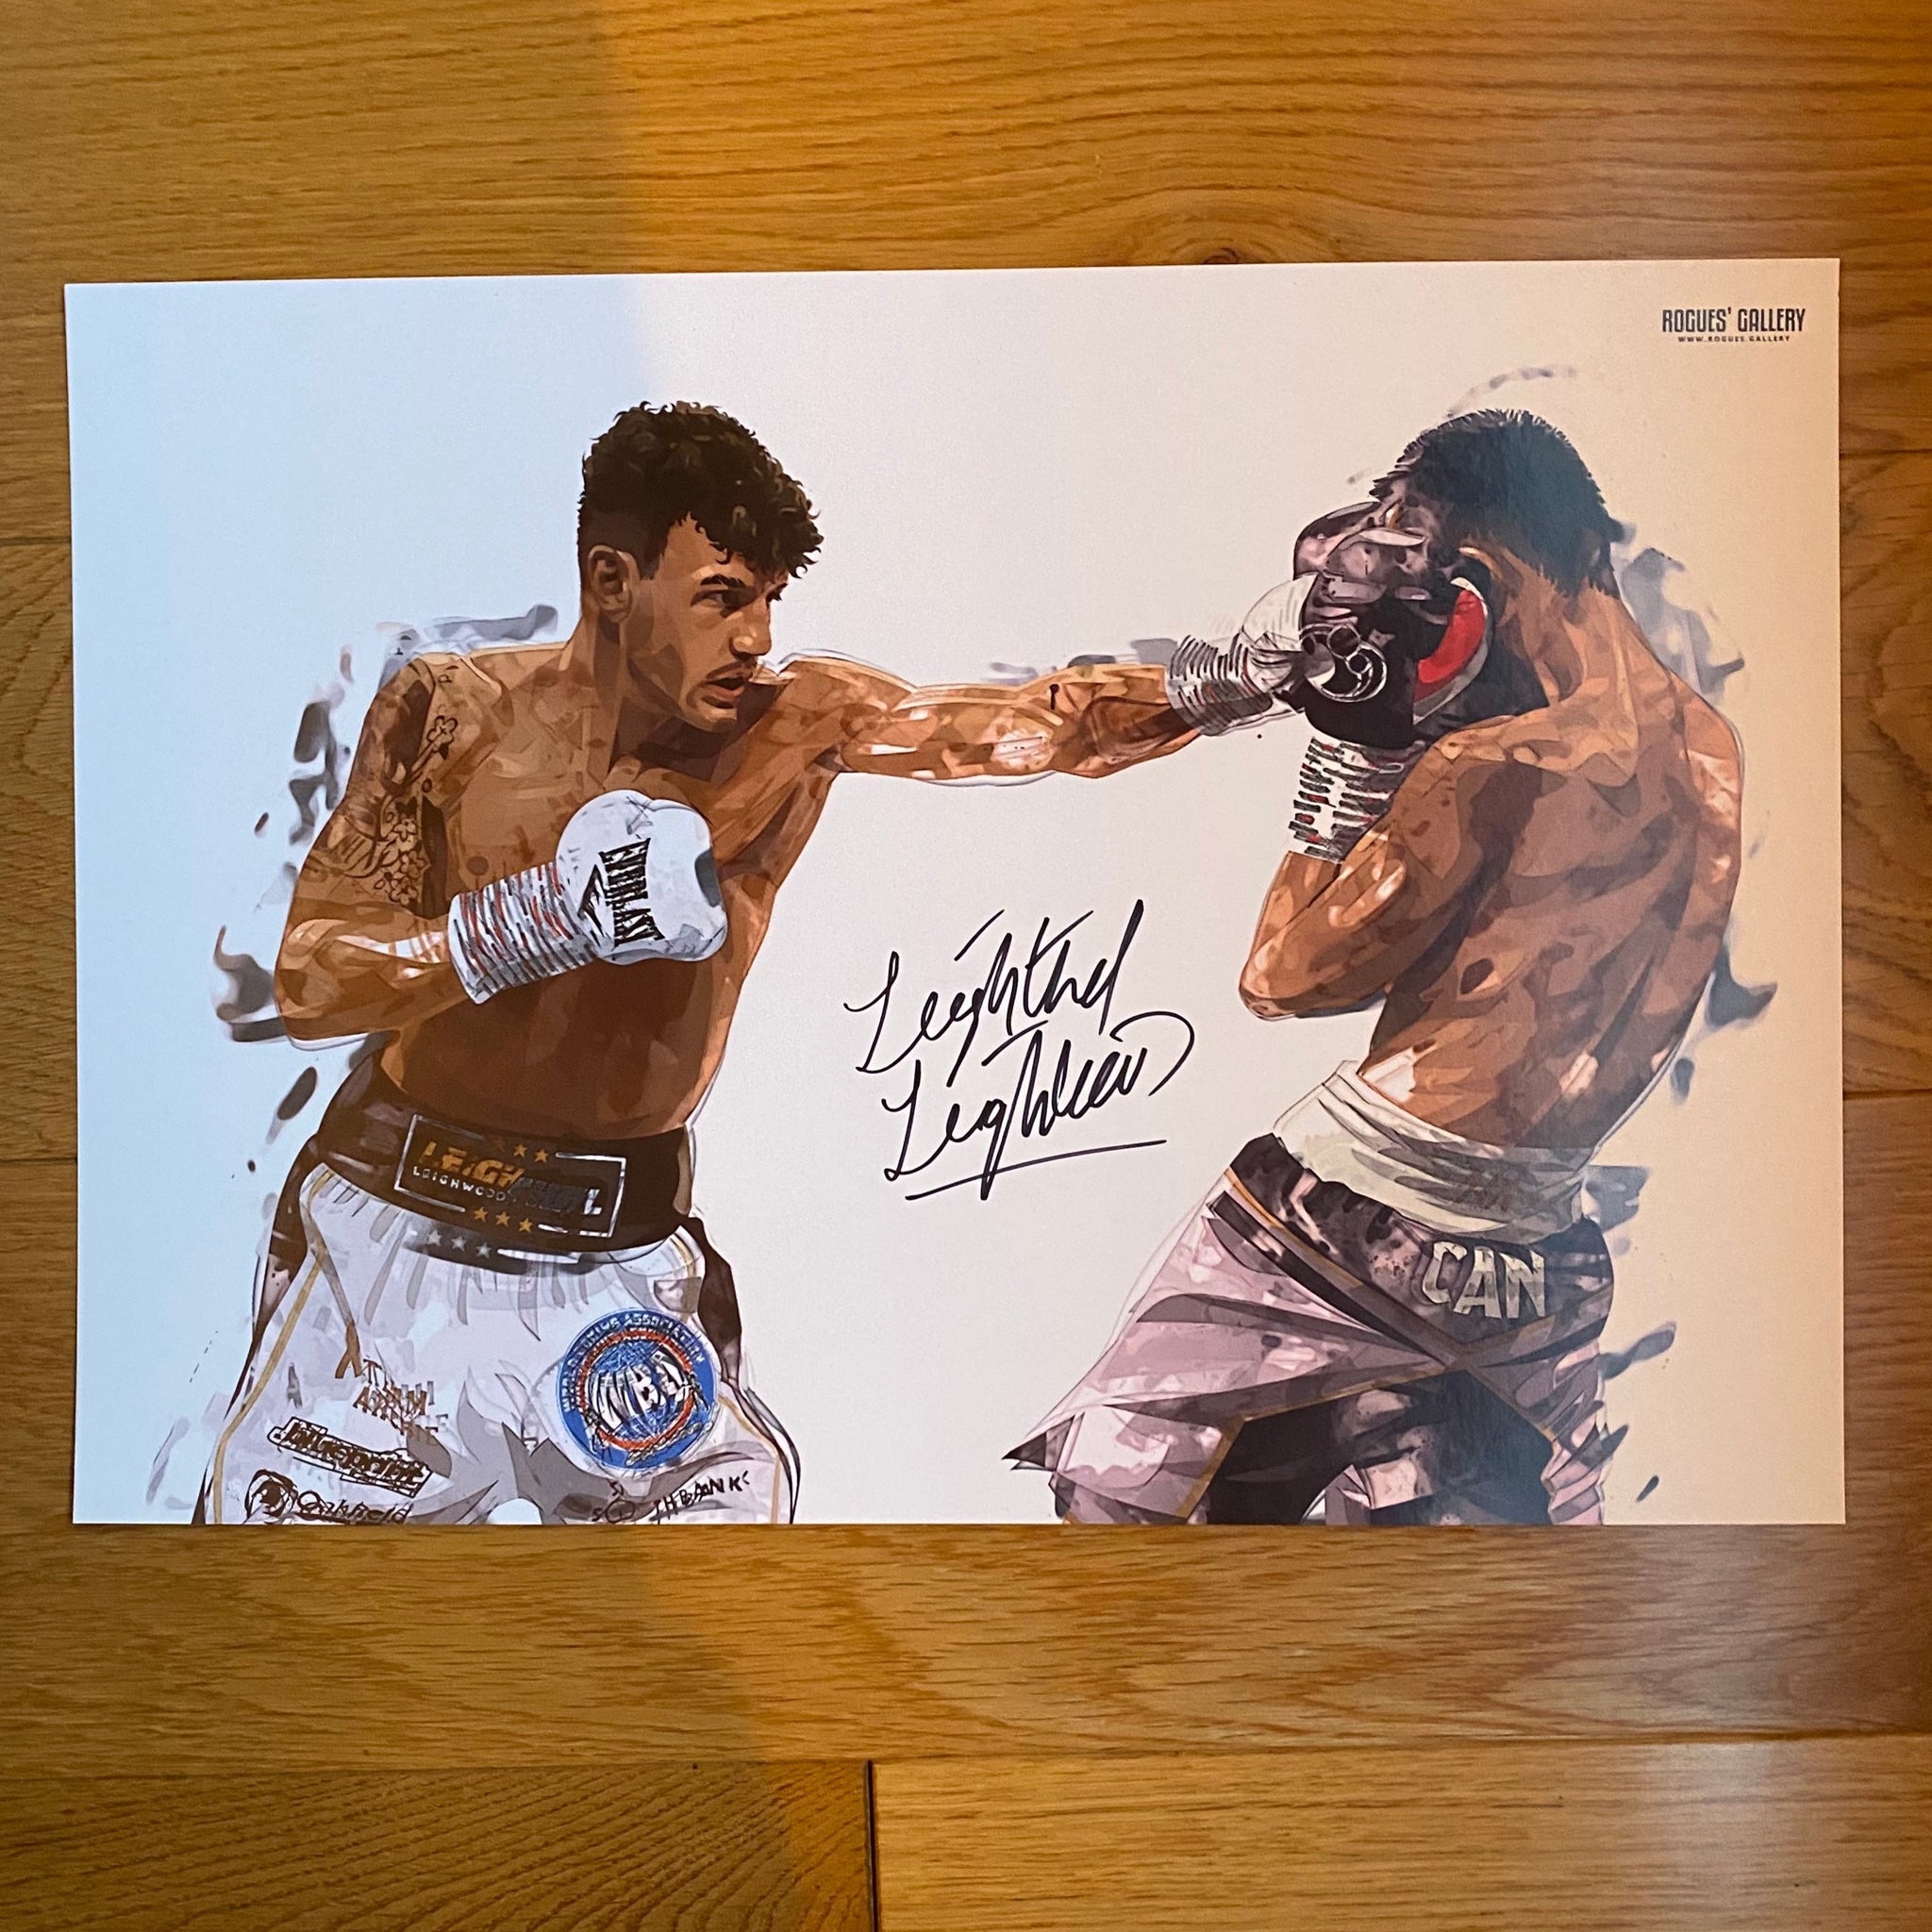 Leighthal Leigh Wood boxer signed memorabilia